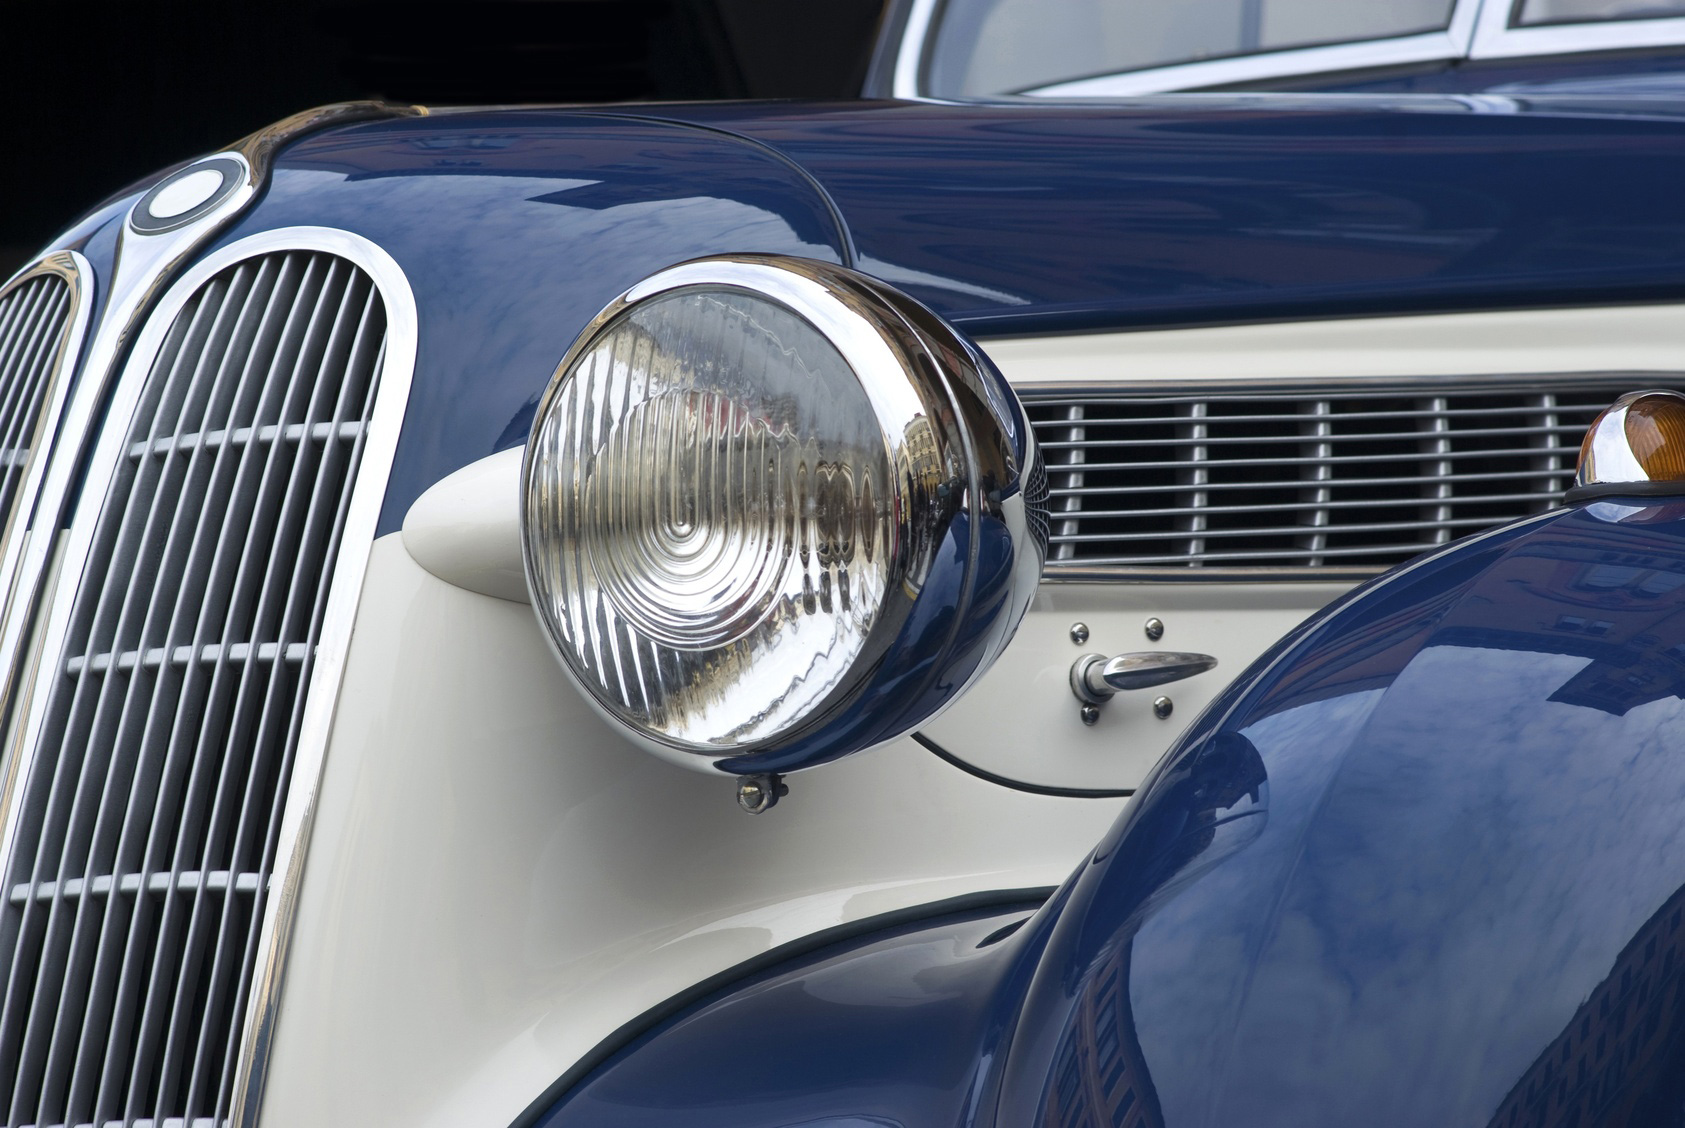 Get Your Classic Car Out of Winter Storage the Right Way